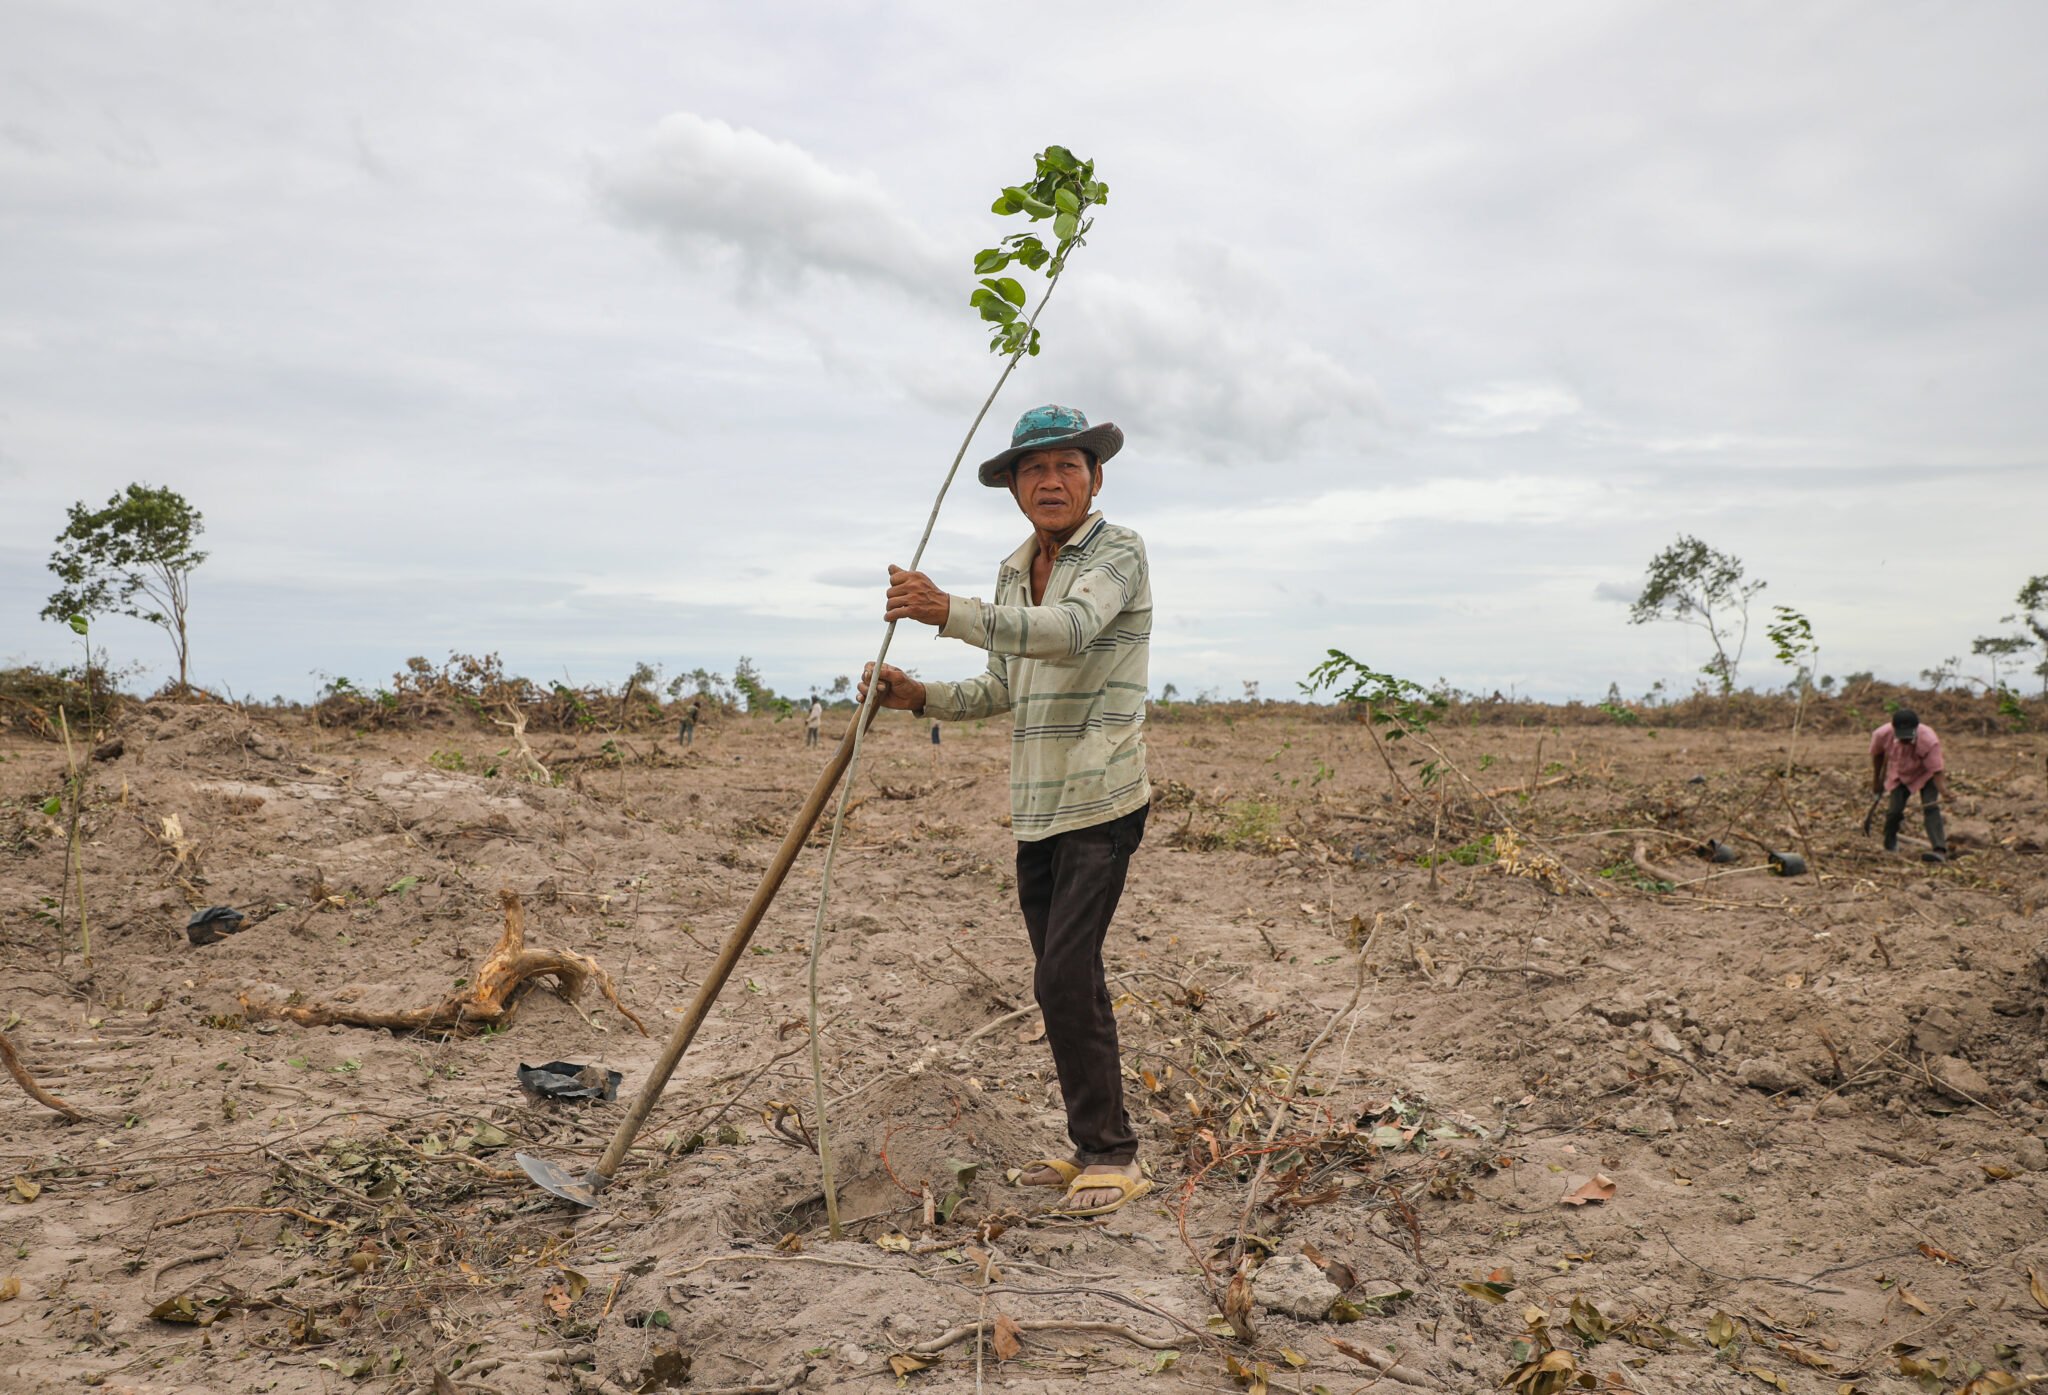 Chan Dy, with the Mong Reththy Group, plants a sapling in the bulldozed section of Phnom Tamao after nearly half of the forest was felled for a satellite city development. Photo by Anton L. Delgado for Southeast Asia Globe.